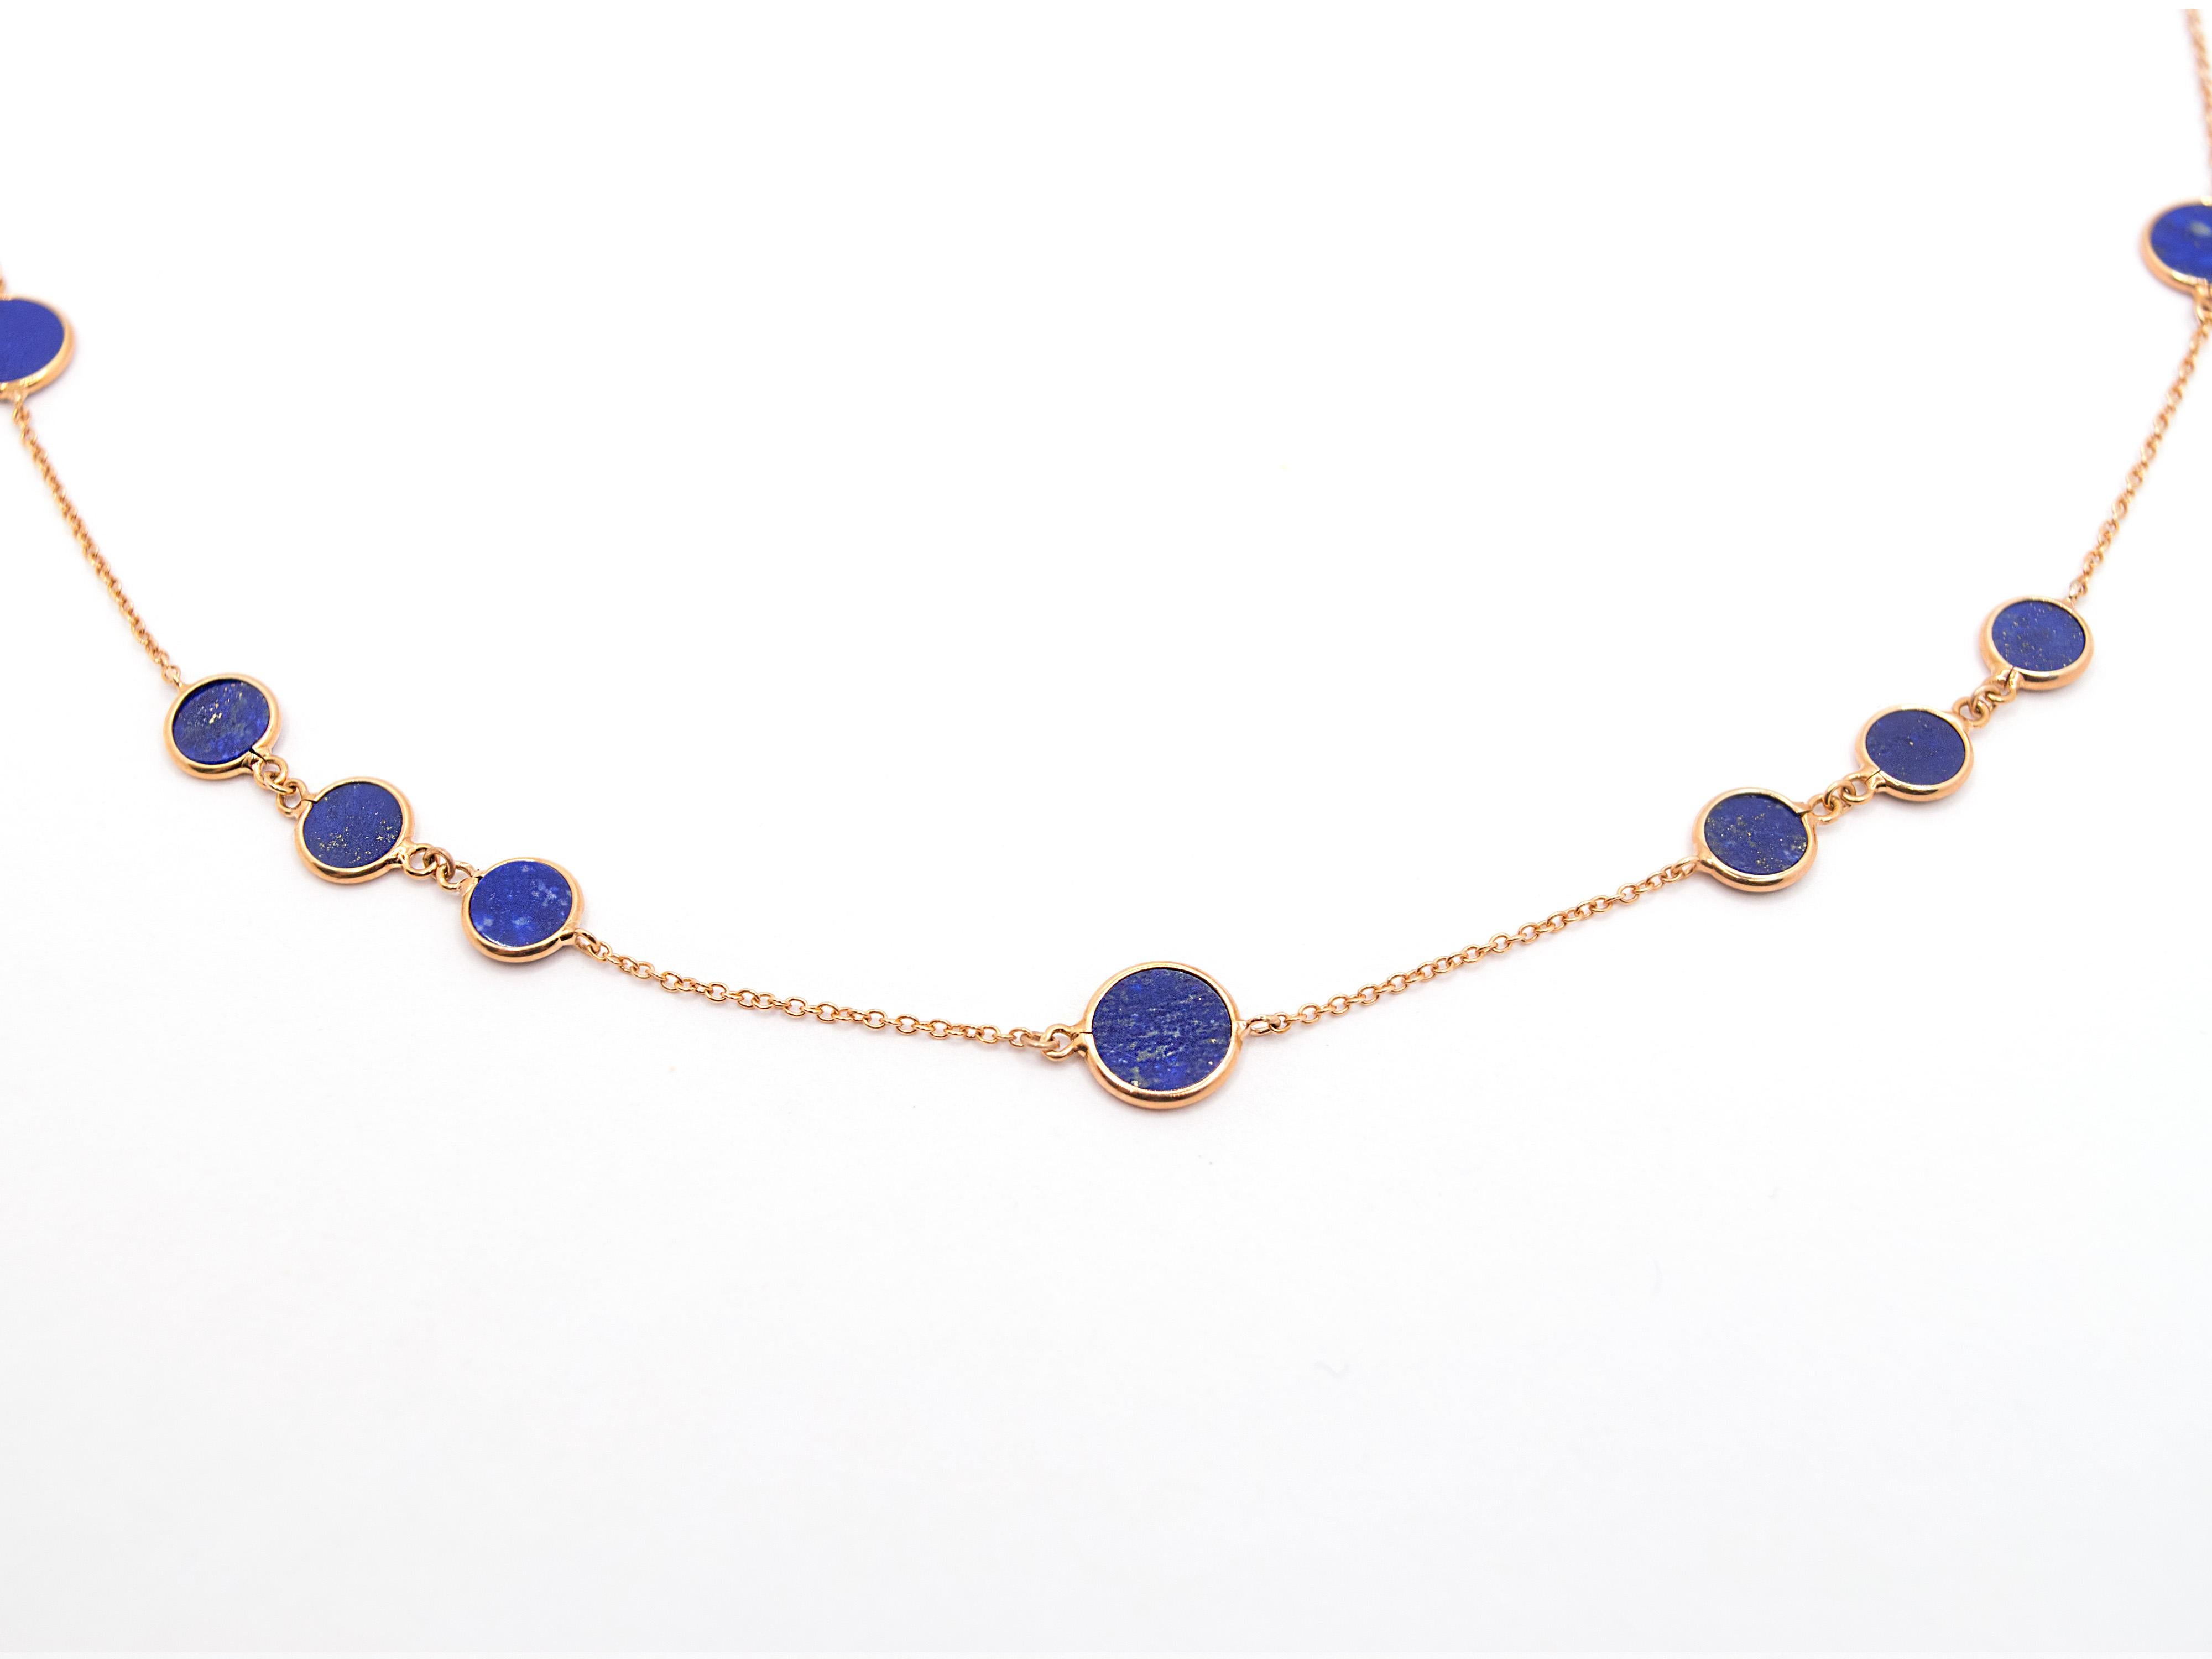 A beautiful necklace in 18 kt rose gold and Lapis lazuli.
This necklace consists of a round chain link interspersed with round slab-cut Lapis lazuli elements of a beautiful deep blue color veined with gold streaks typical of this stone.
The discs